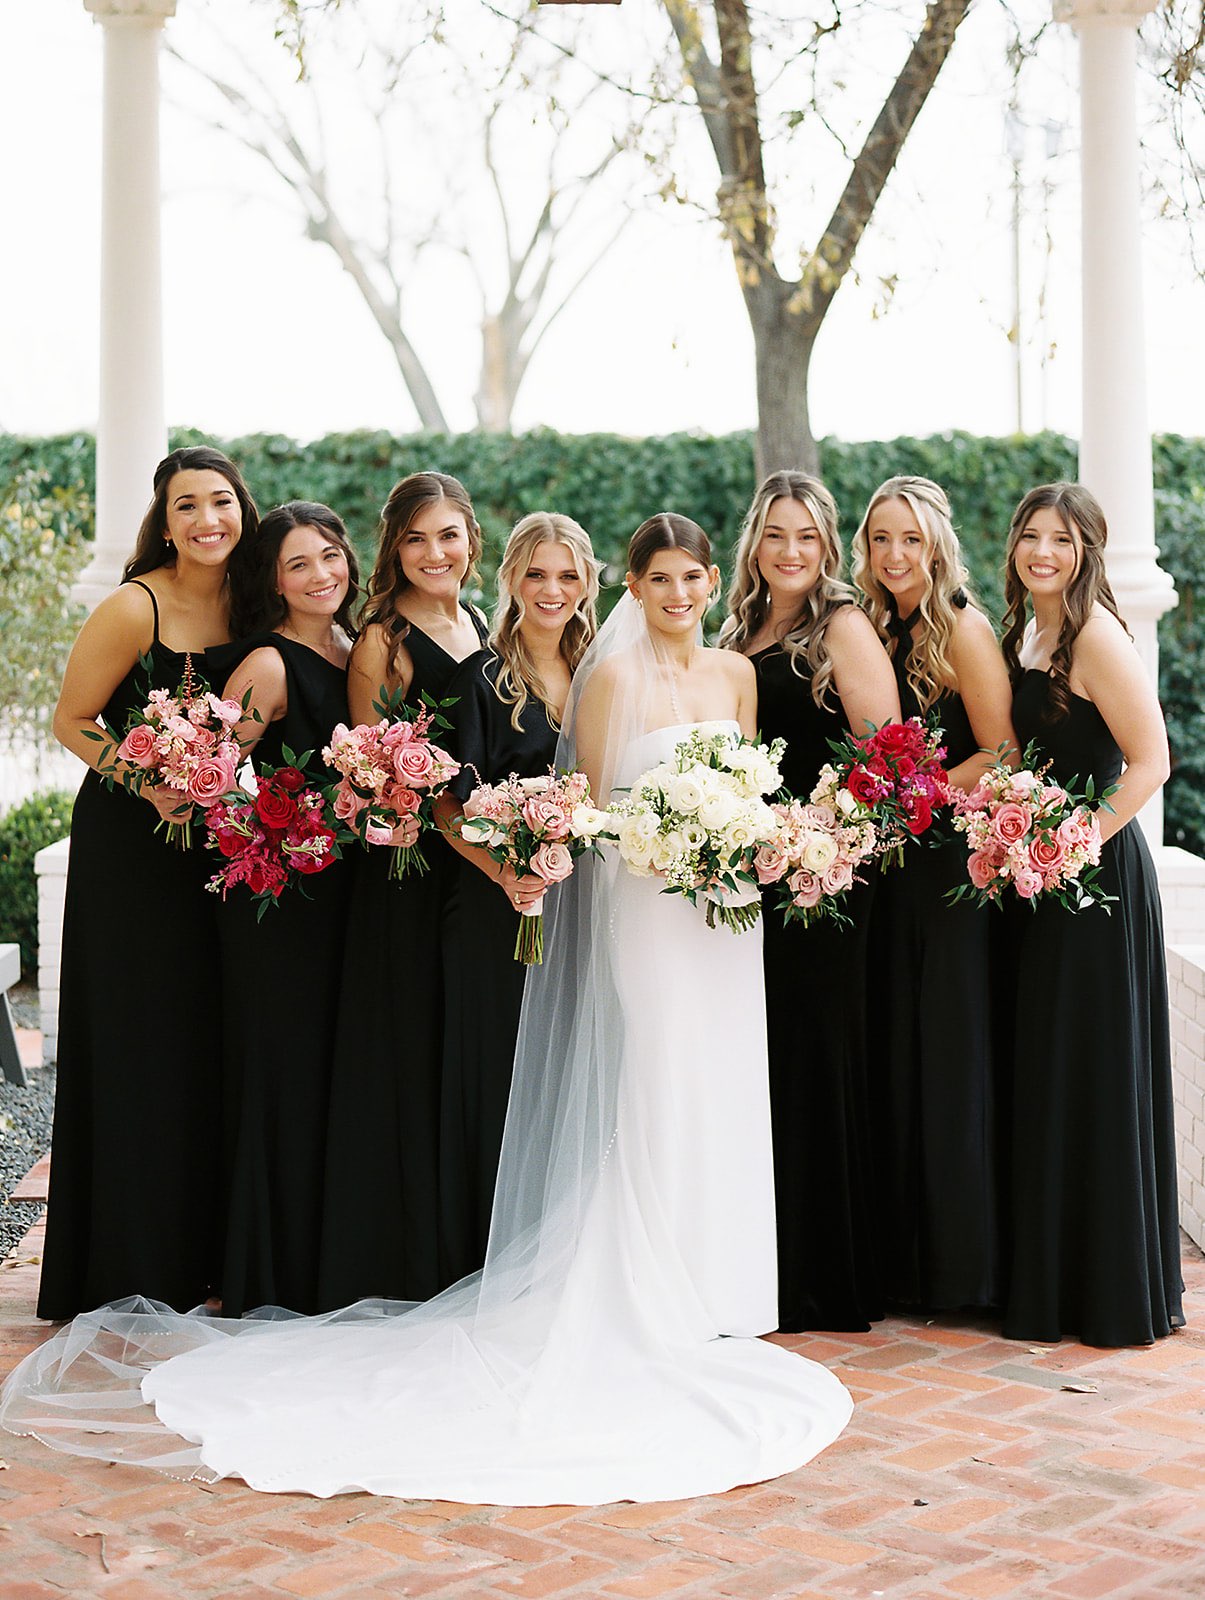 Bridesmaids in black dresses with pink ombre bouquets